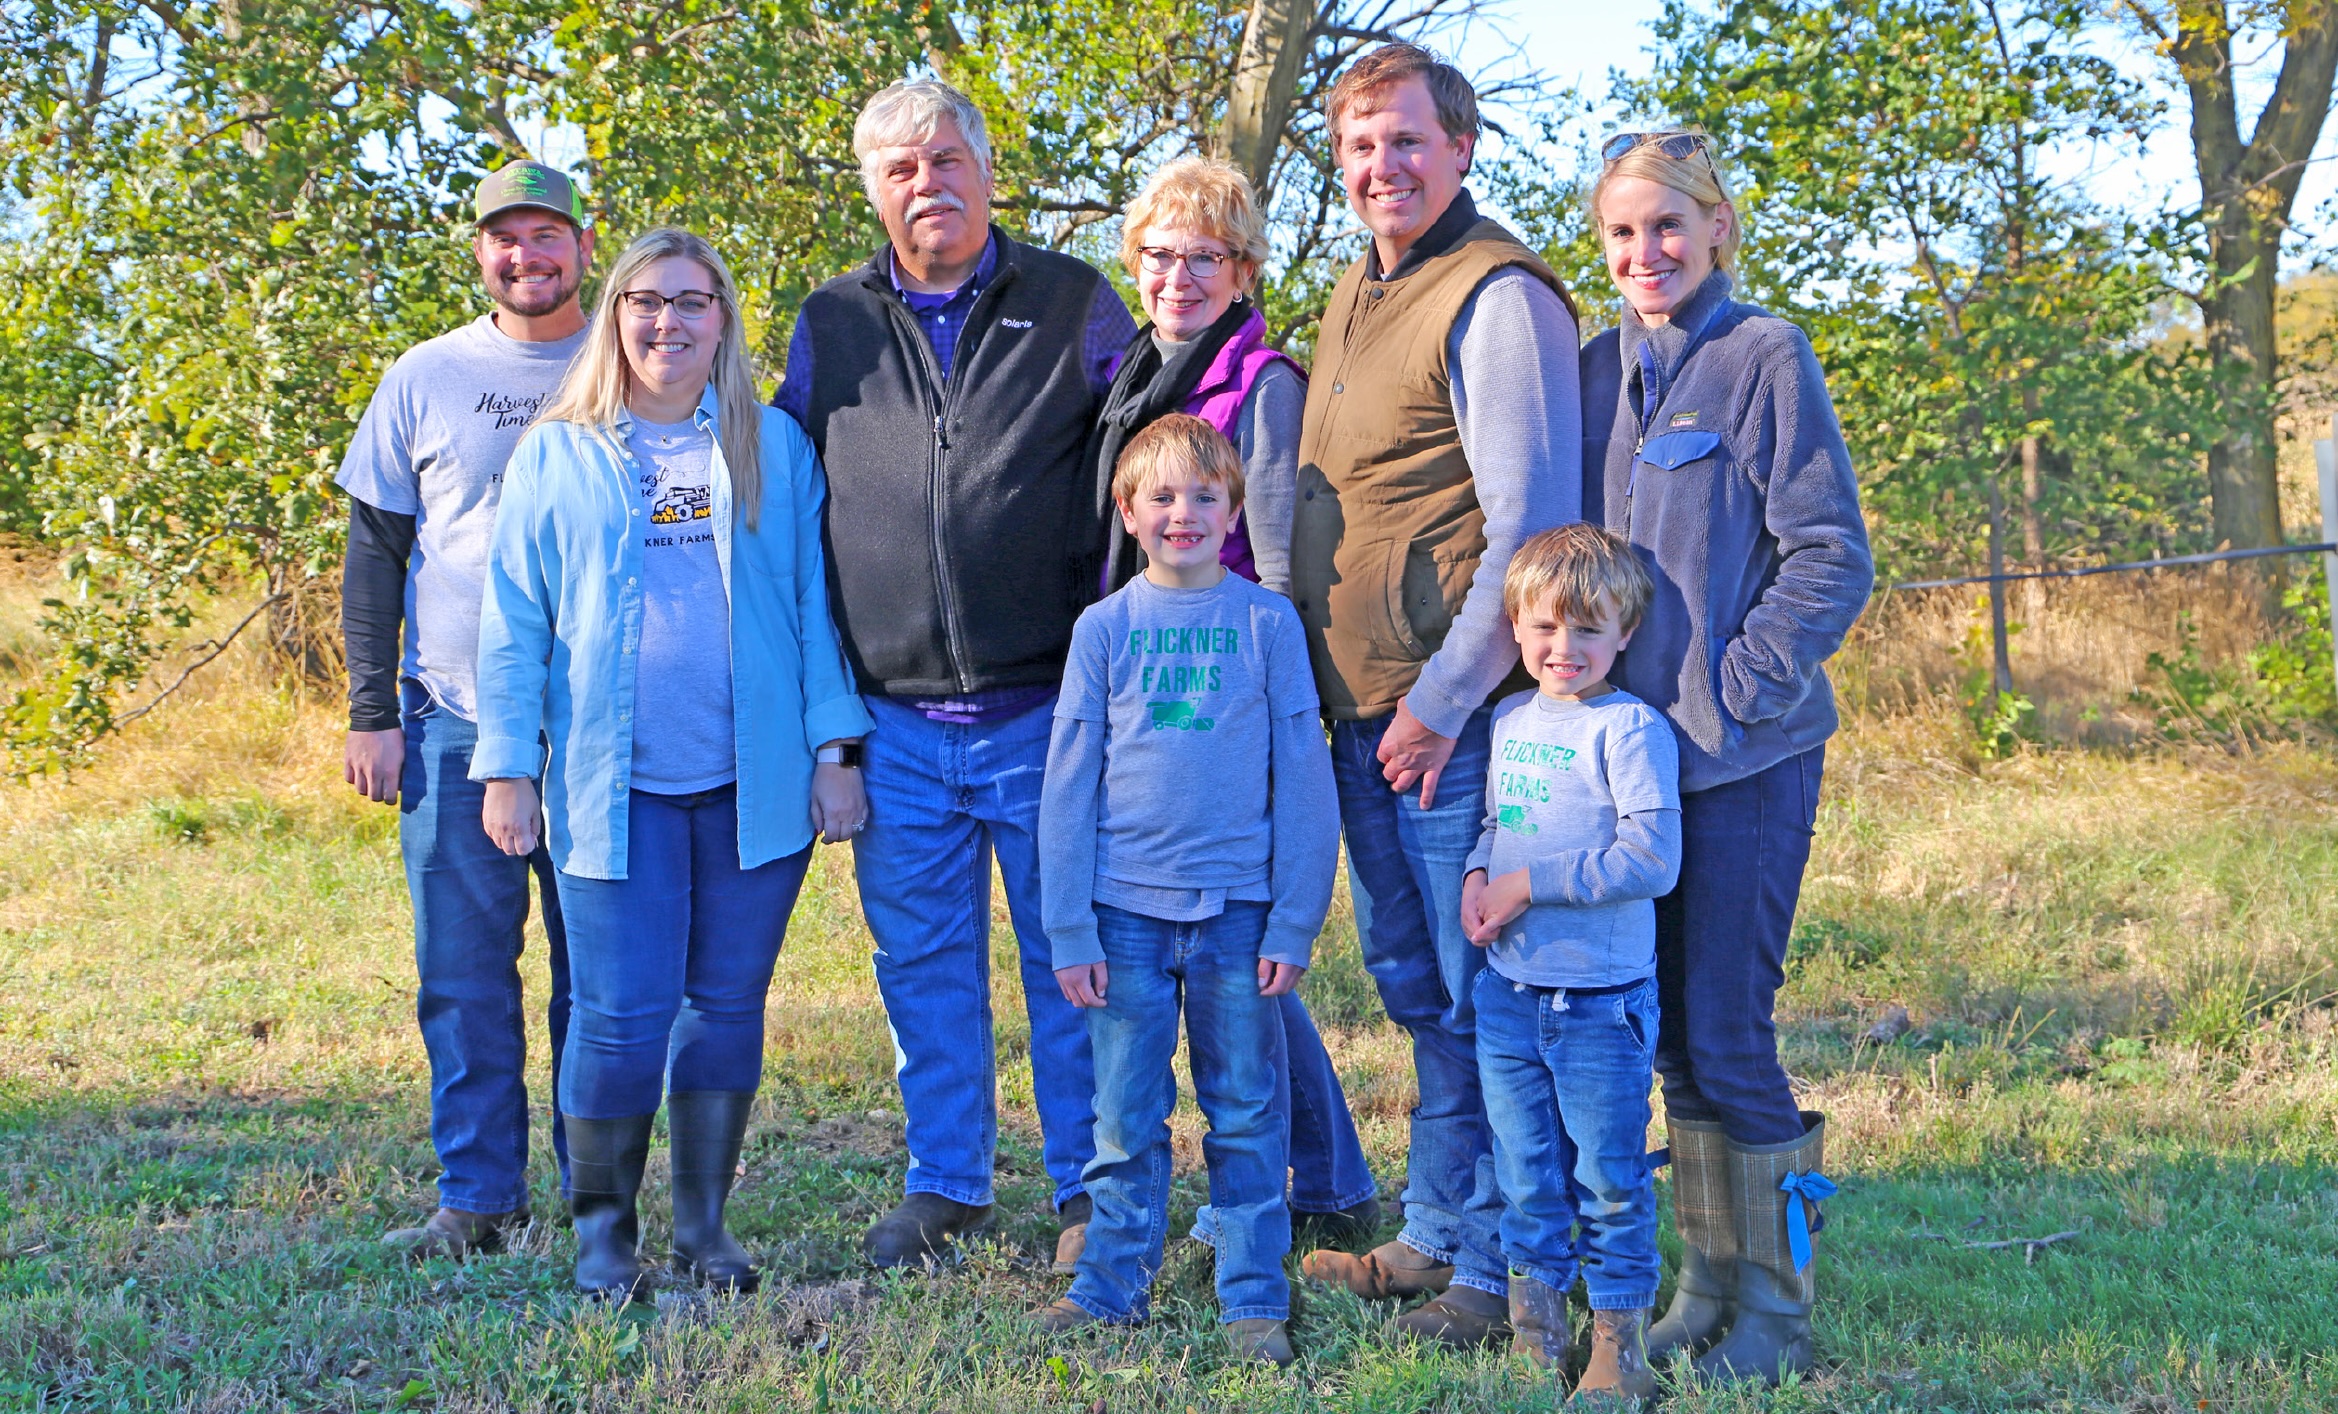 Ray and Susan Flickner, Wichita, have received the Kansas Leopold Conservation Award. (Courtesy photo.)